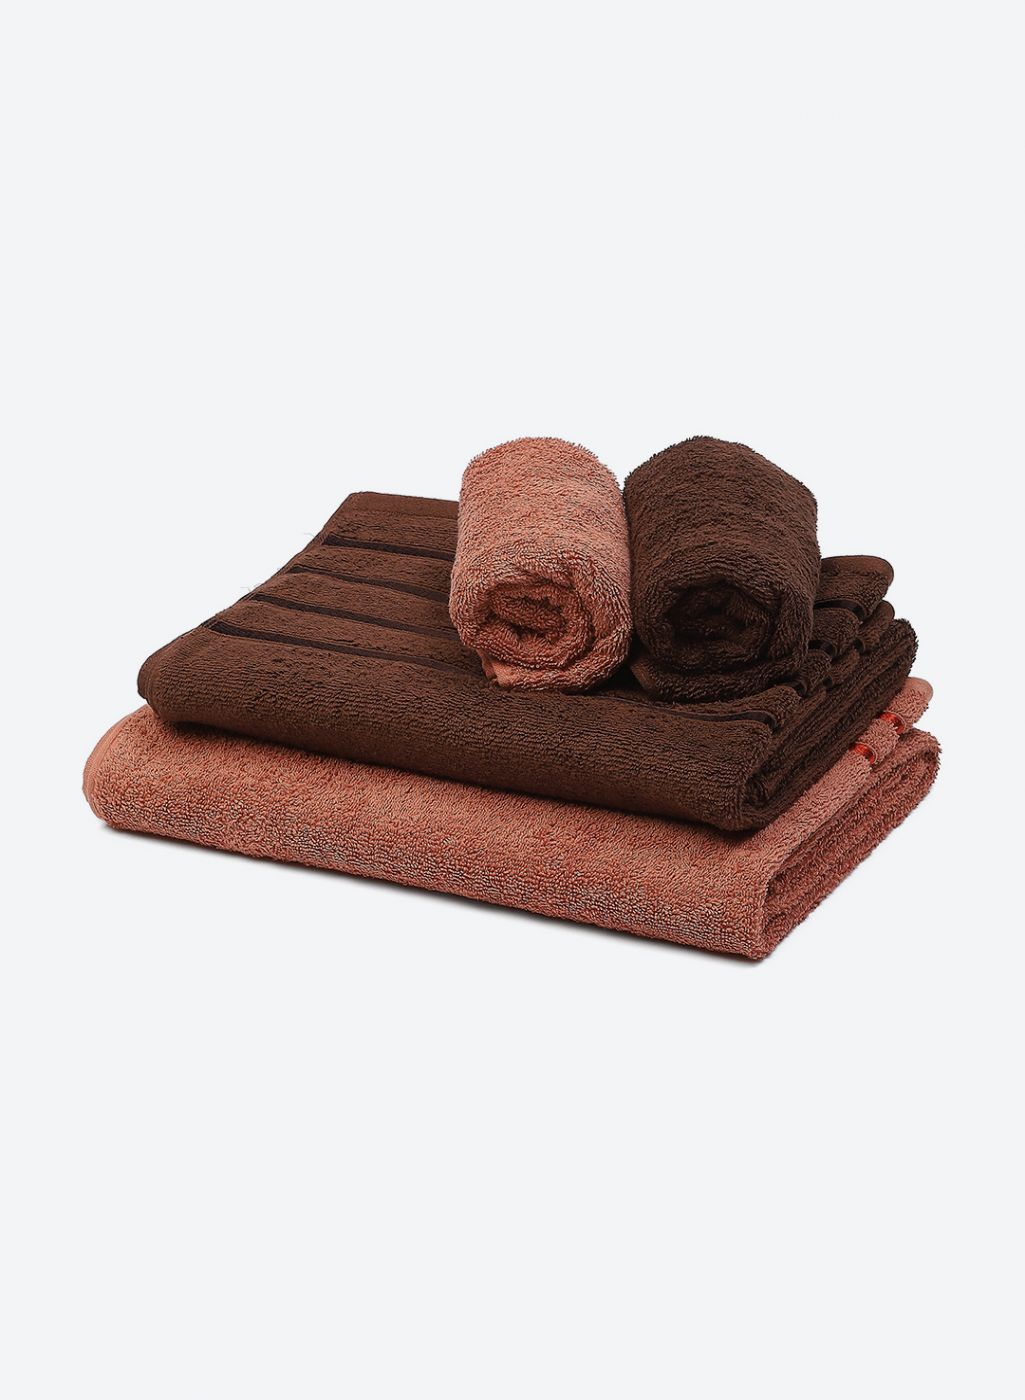 Brown & Peach Cotton 525 GSM Towel Set Pack of 4 (2 Bath & 2 Hand Towels)